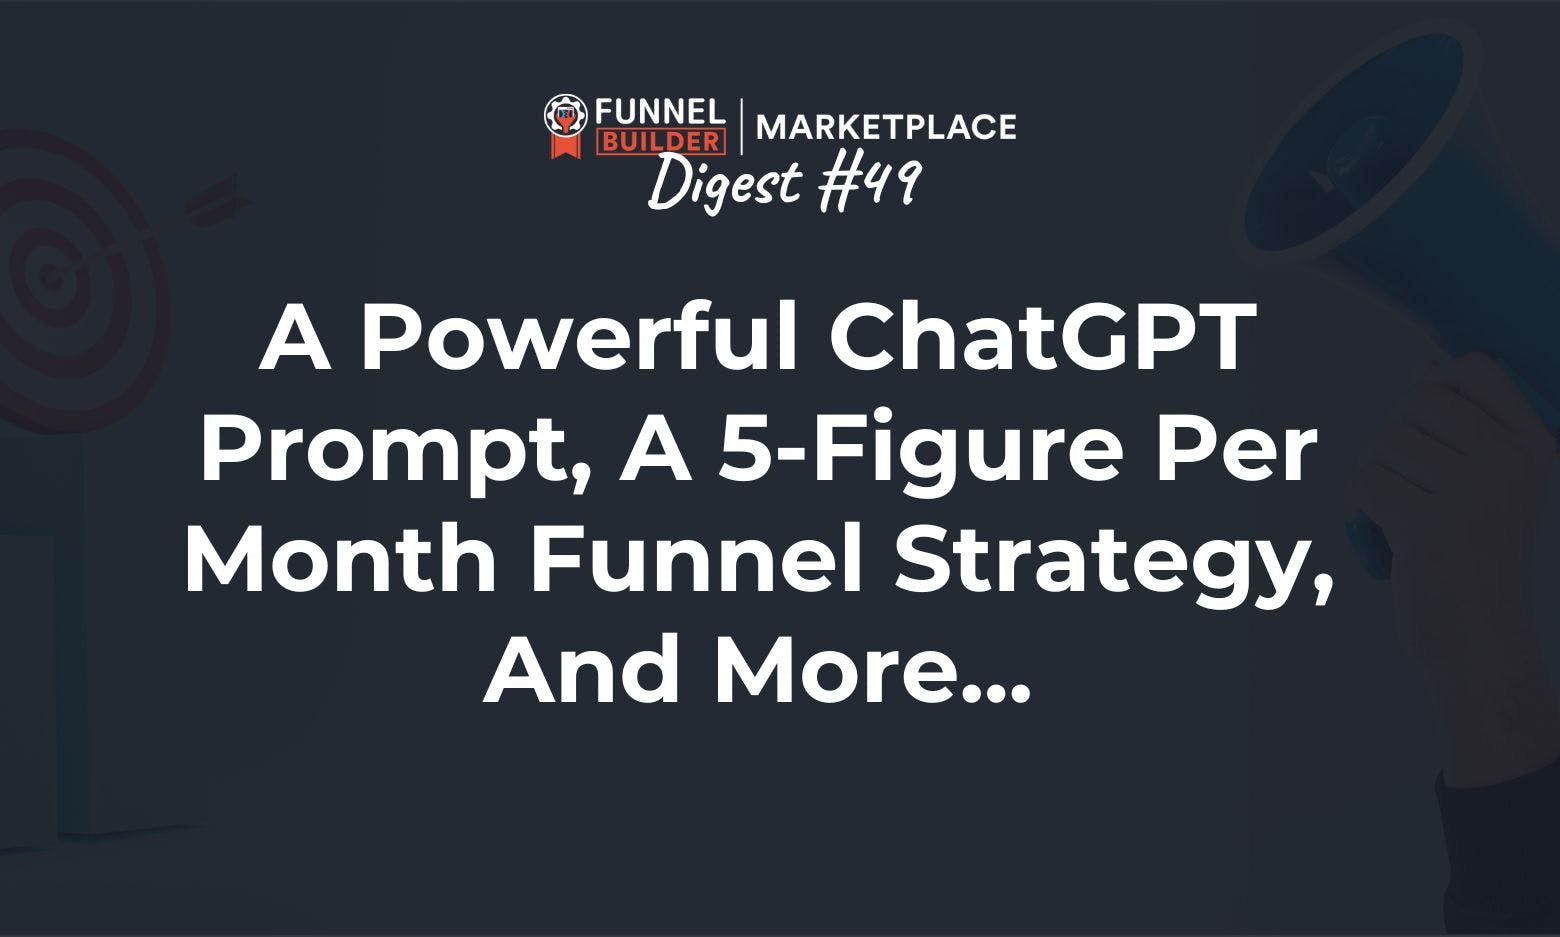 FBM Digest #49: A powerful ChatGPT prompt, 5-figure per month funnel strategy, and more...